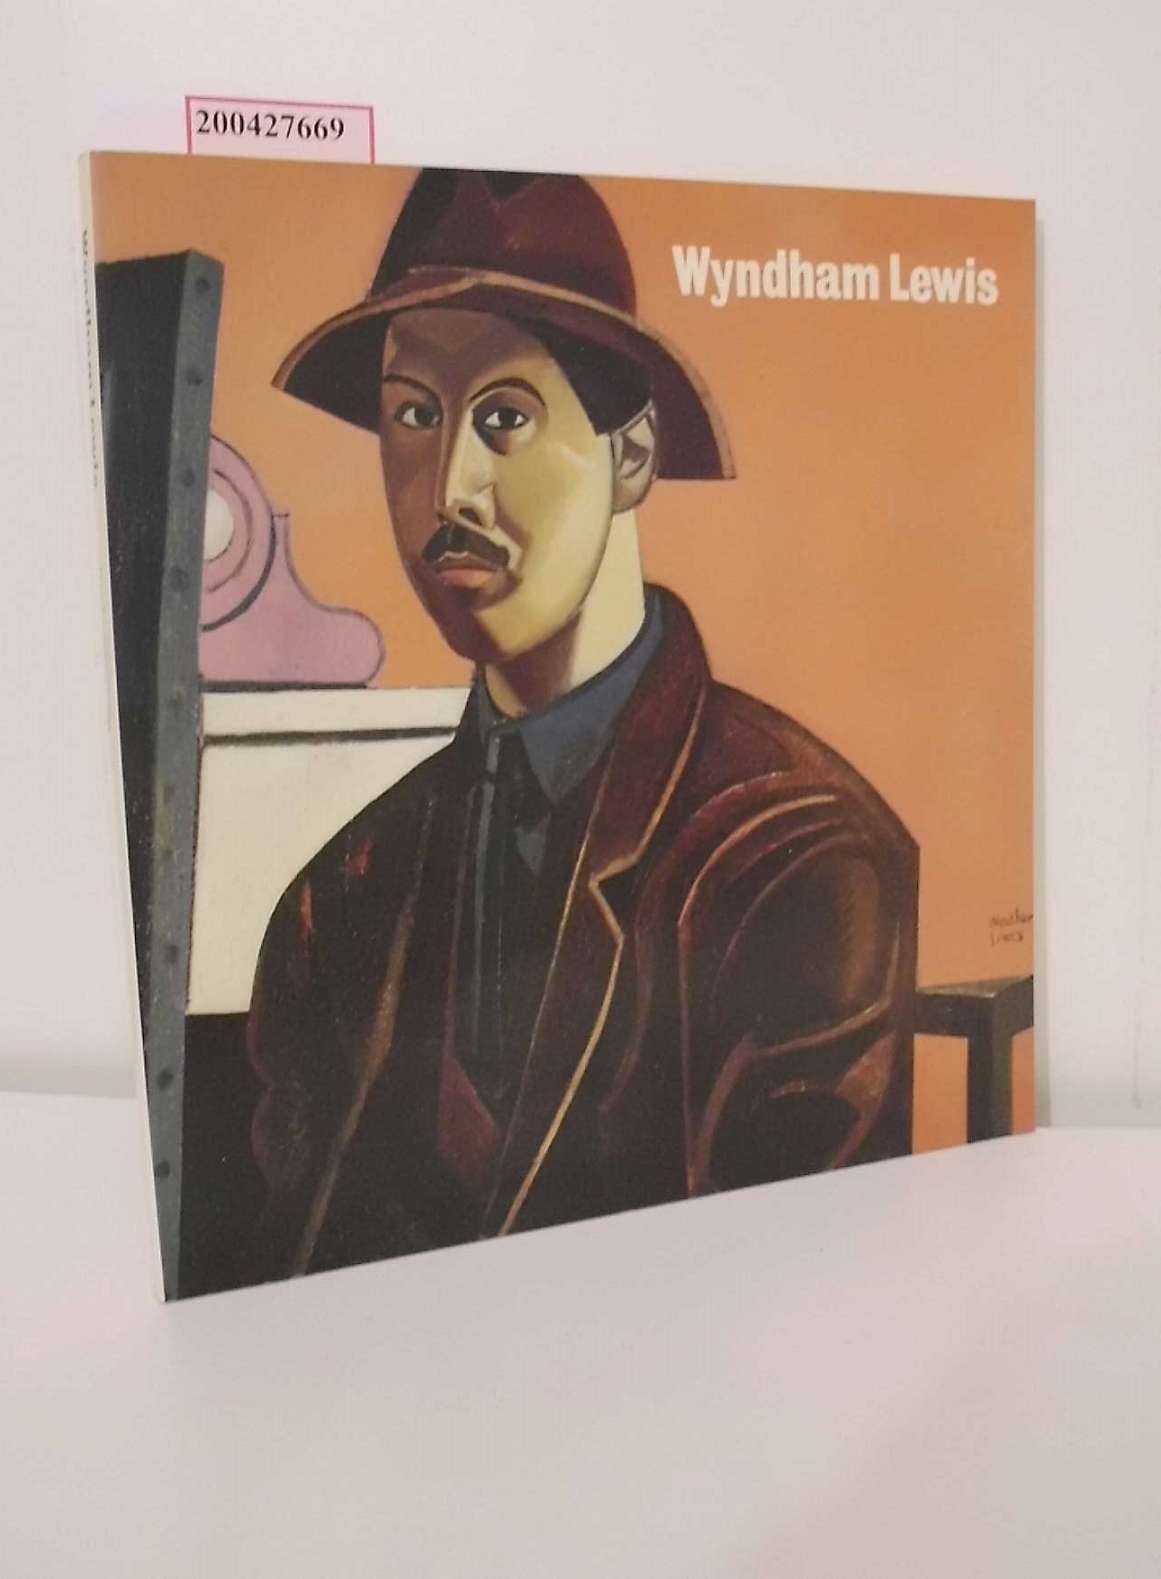 Wyndham Lewis. With contributions by Sir John Rothenstein, Richard Cork, Omar S. Pound in association with the City of Manchester Art Galleries.  First editition. - Farrington, Jane